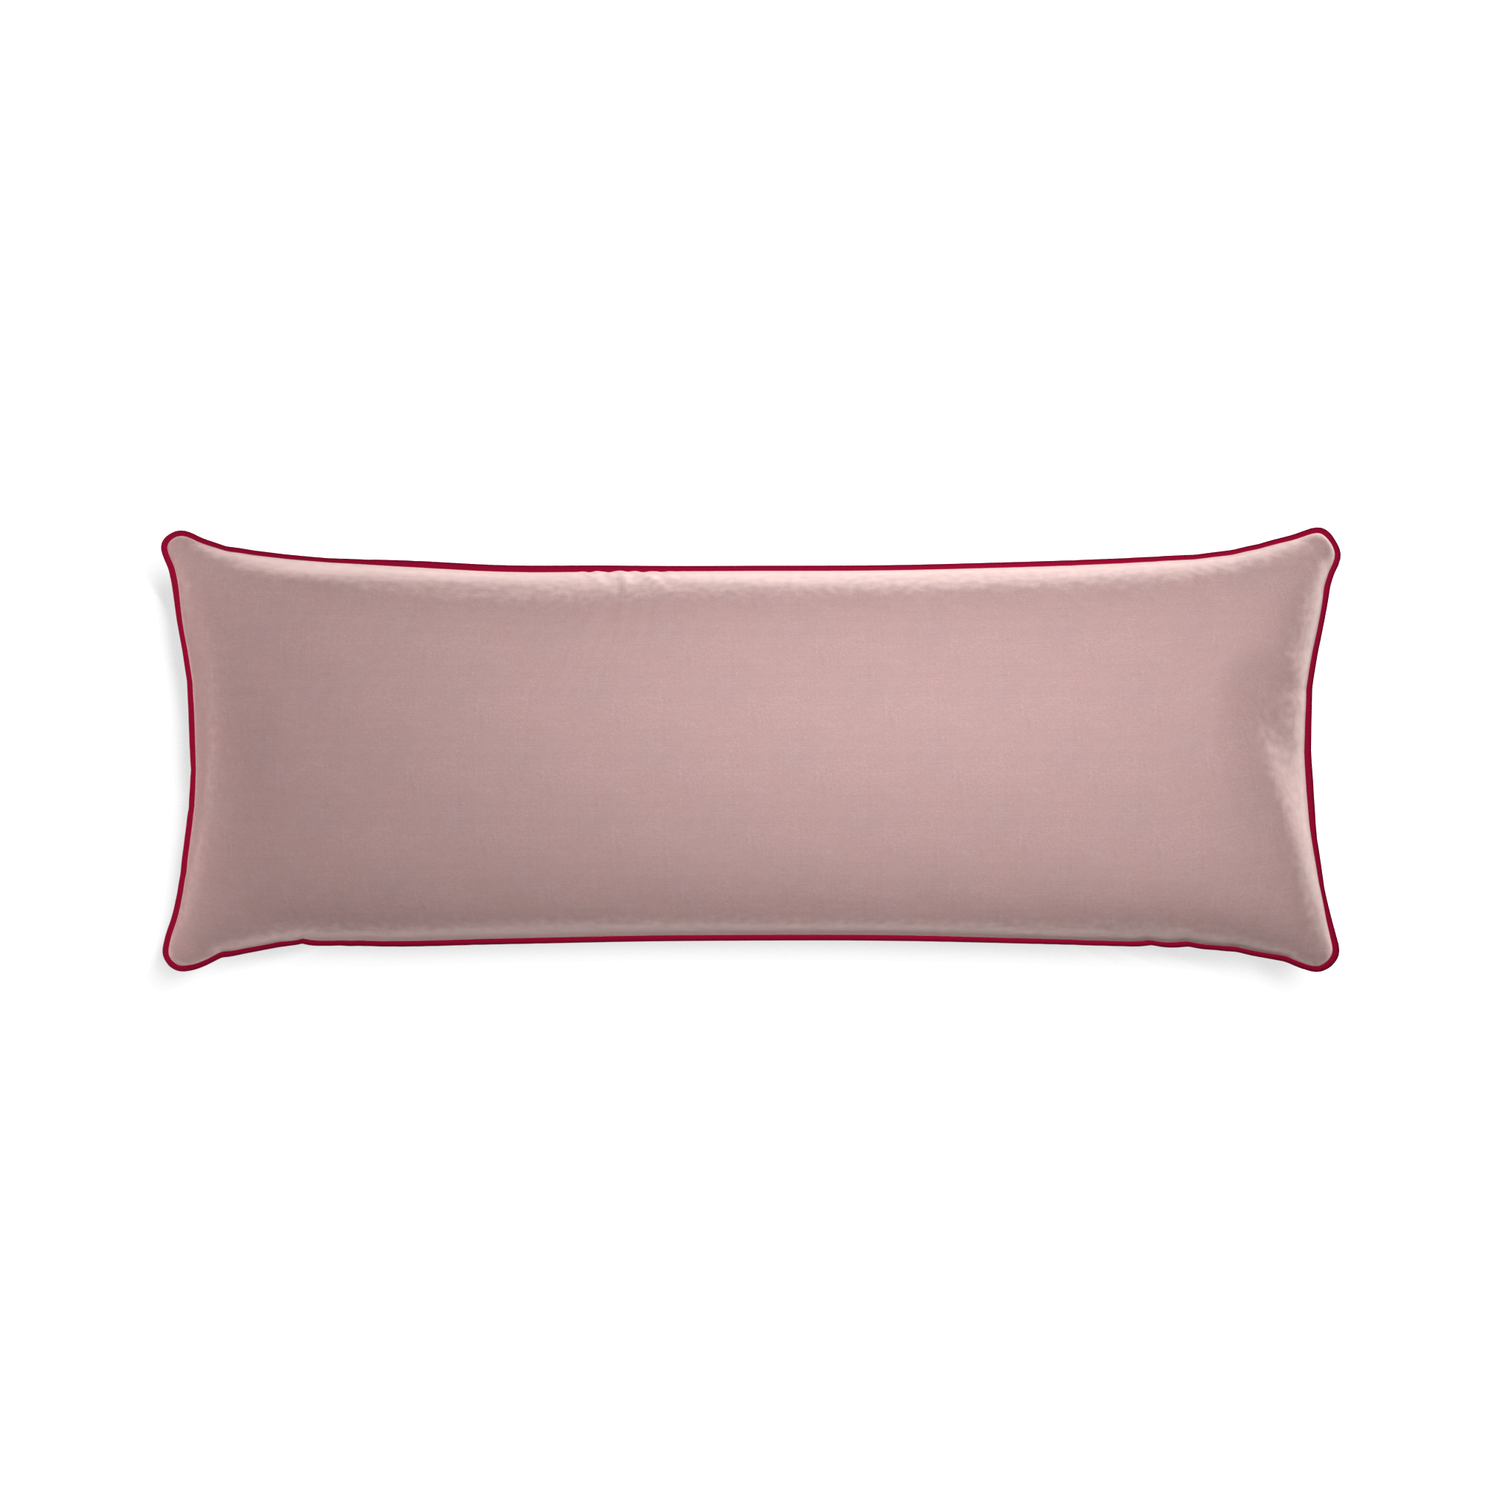 rectangle mauve velvet pillow with dark red piping